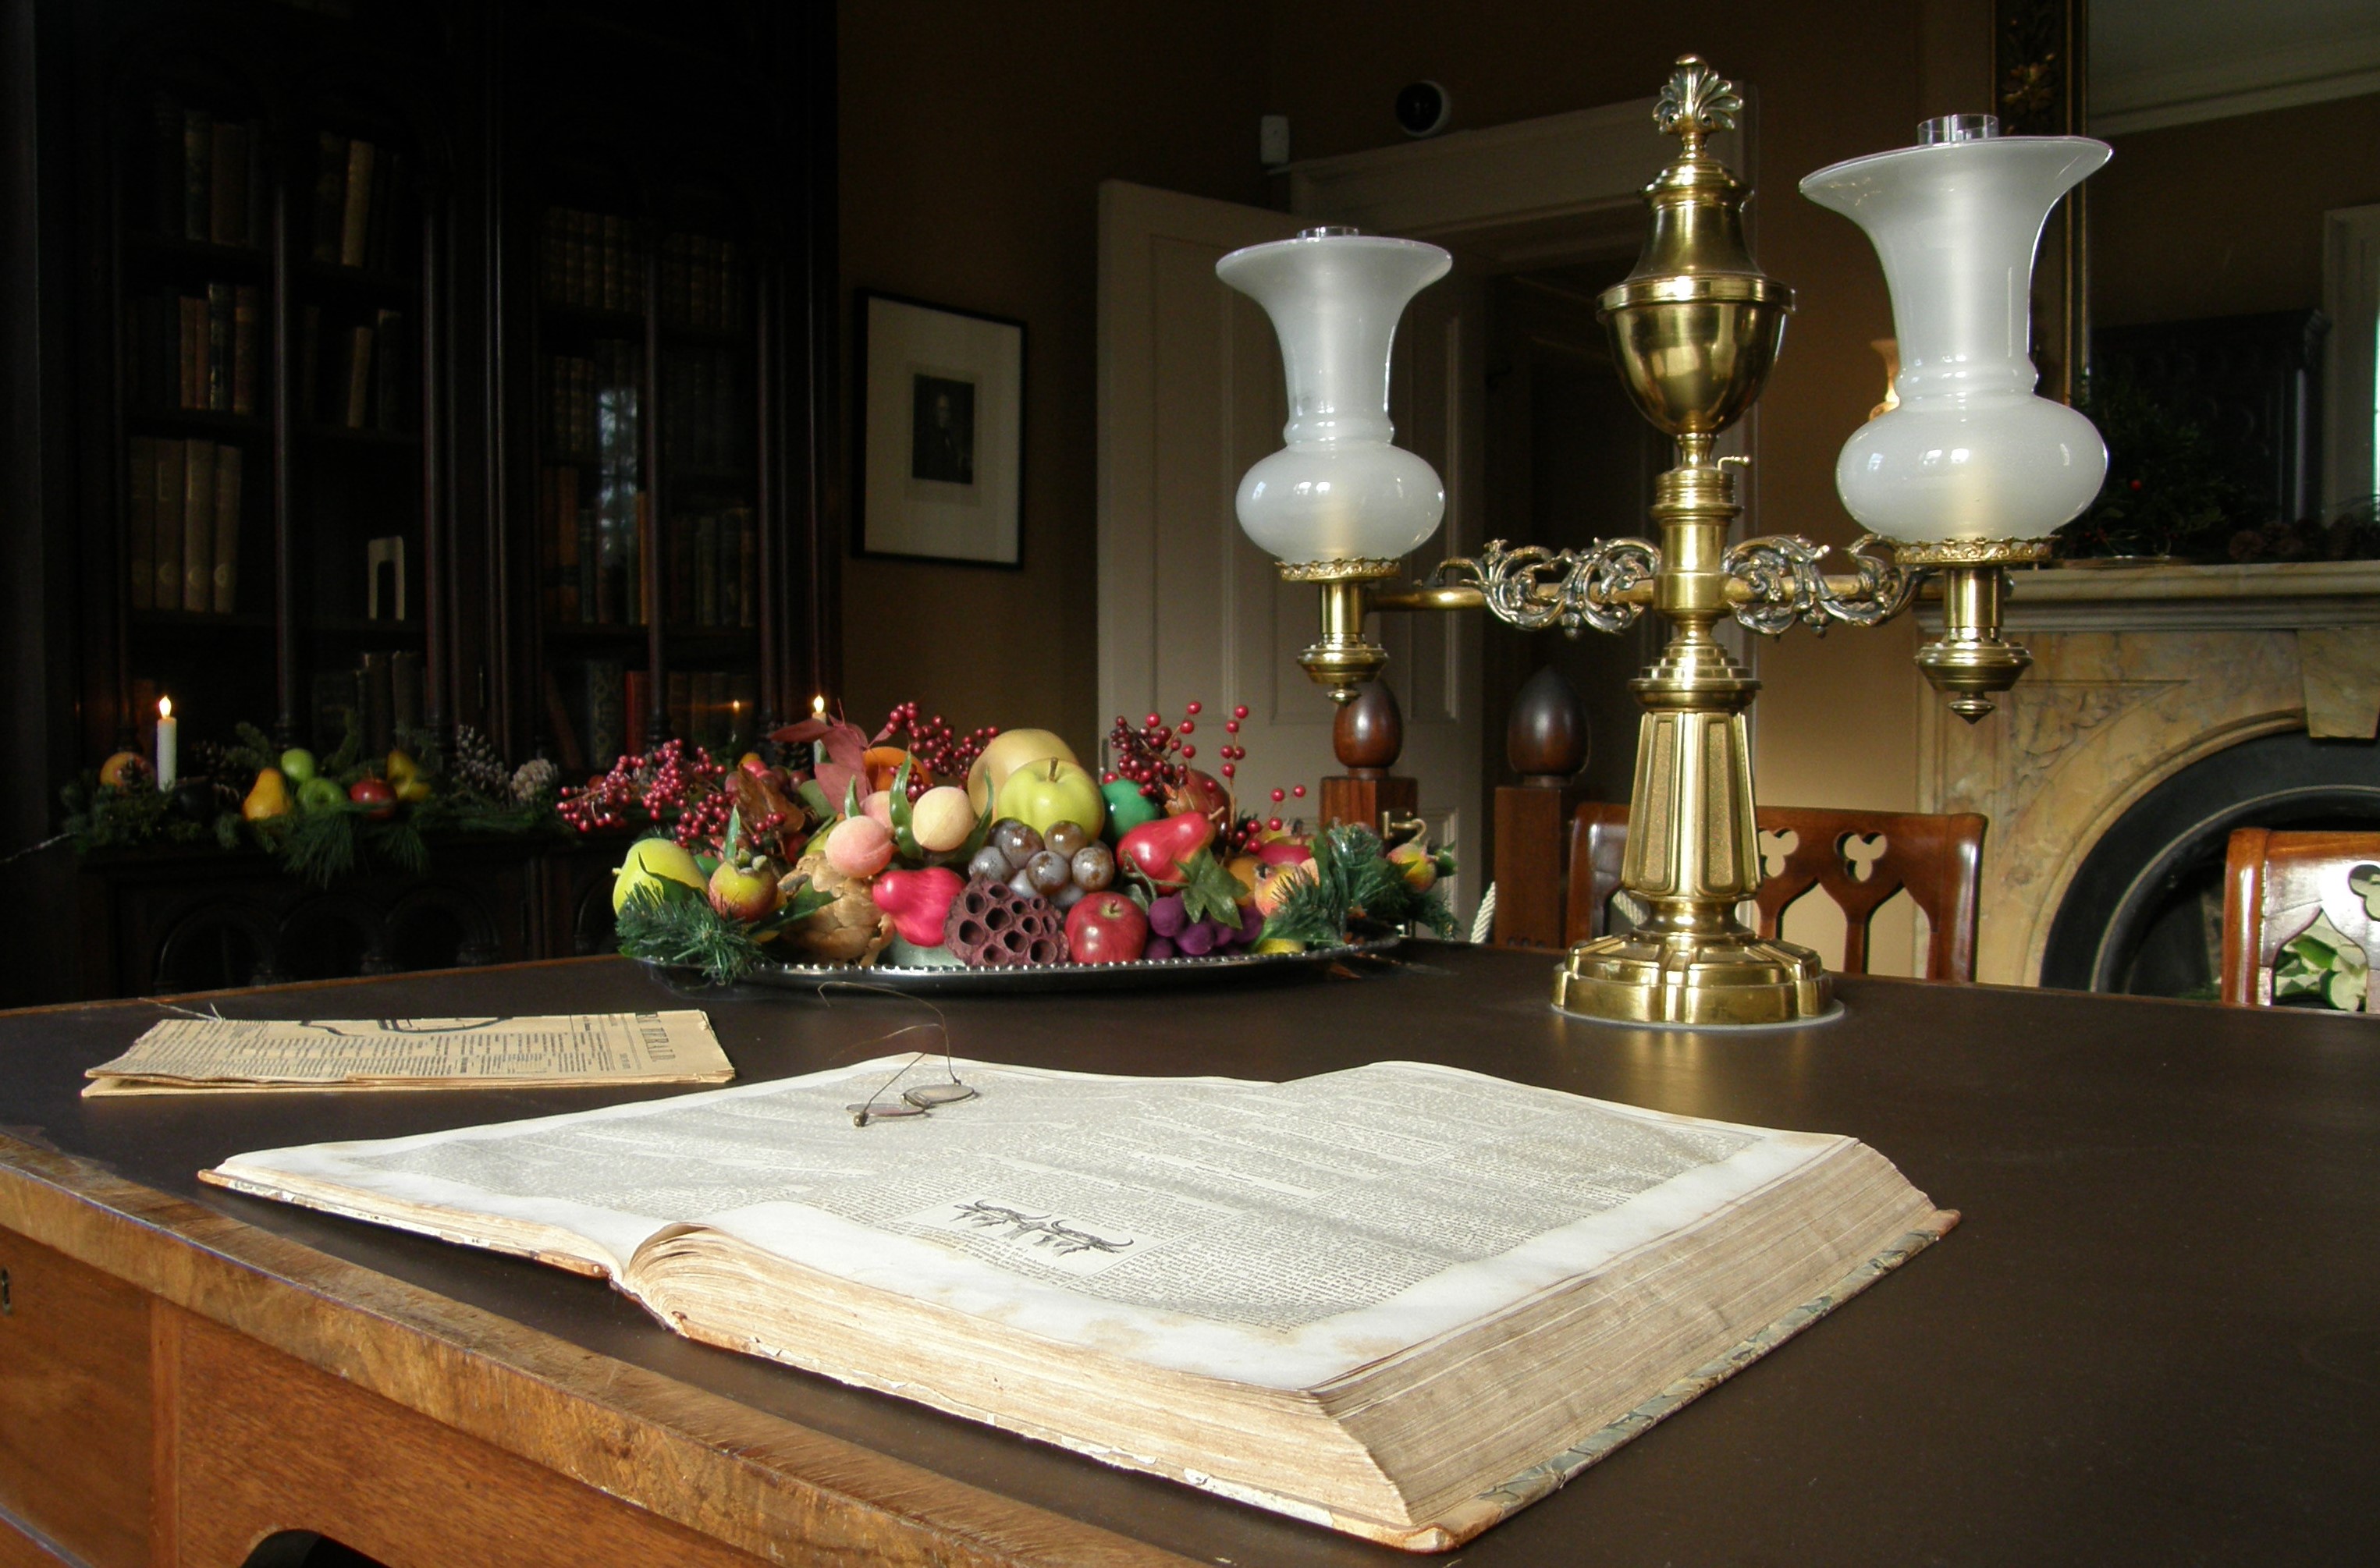 A table decorated with a lamp, a large book, and a bowl of grapes